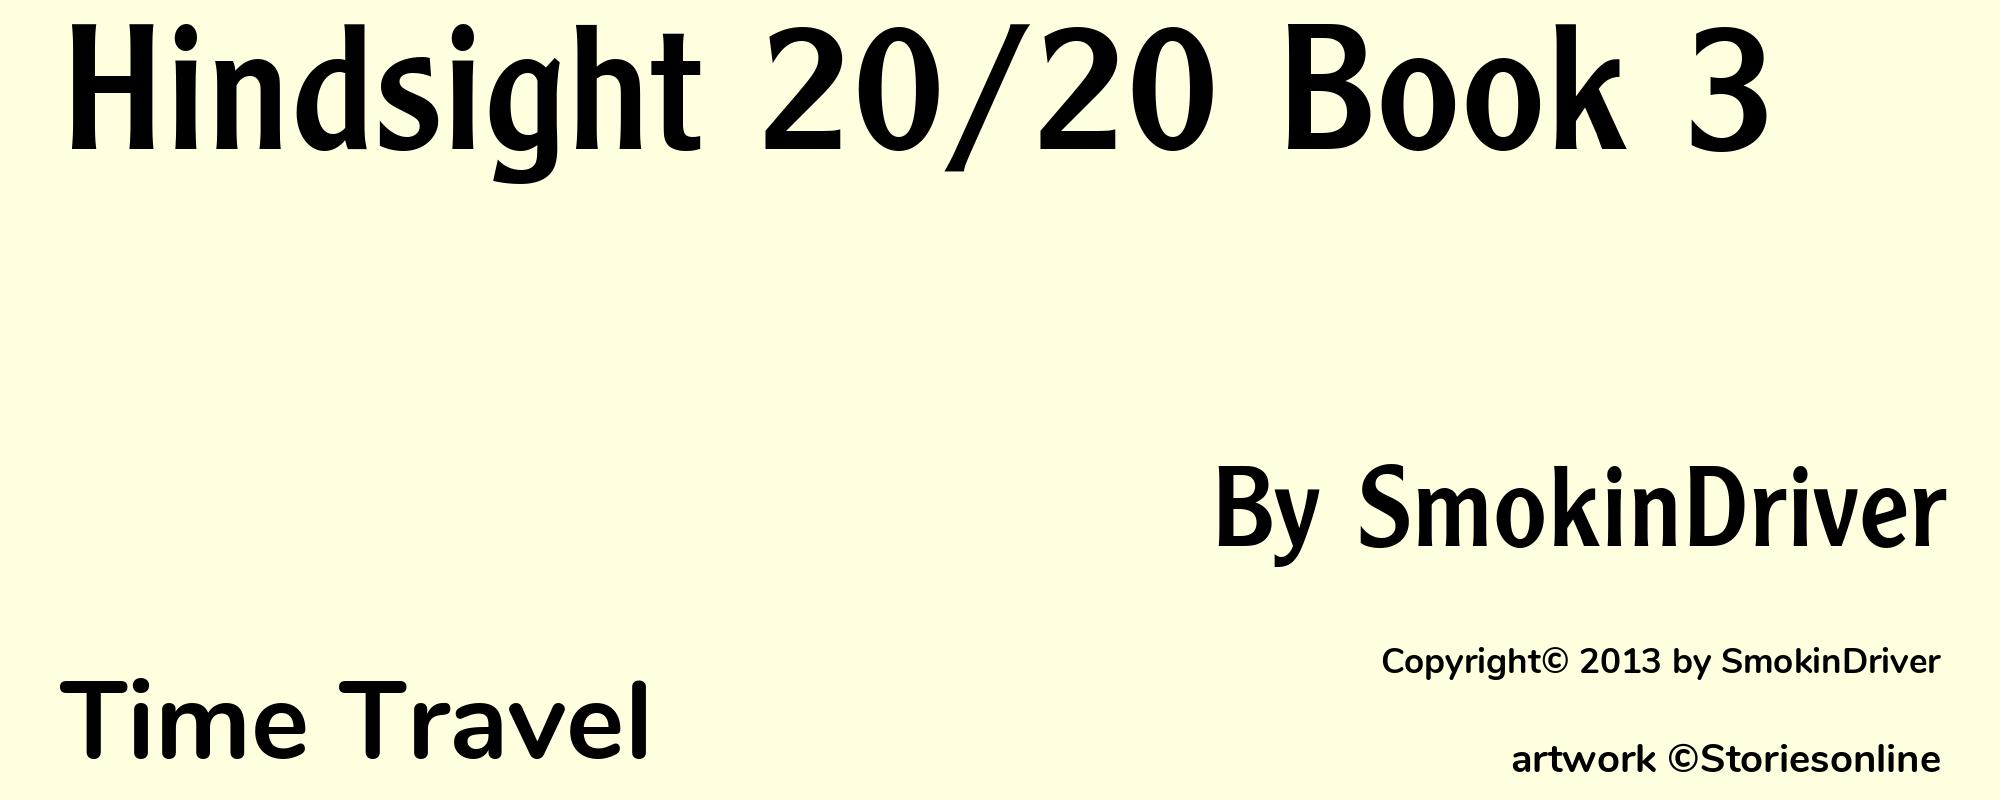 Hindsight 20/20 Book 3 - Cover